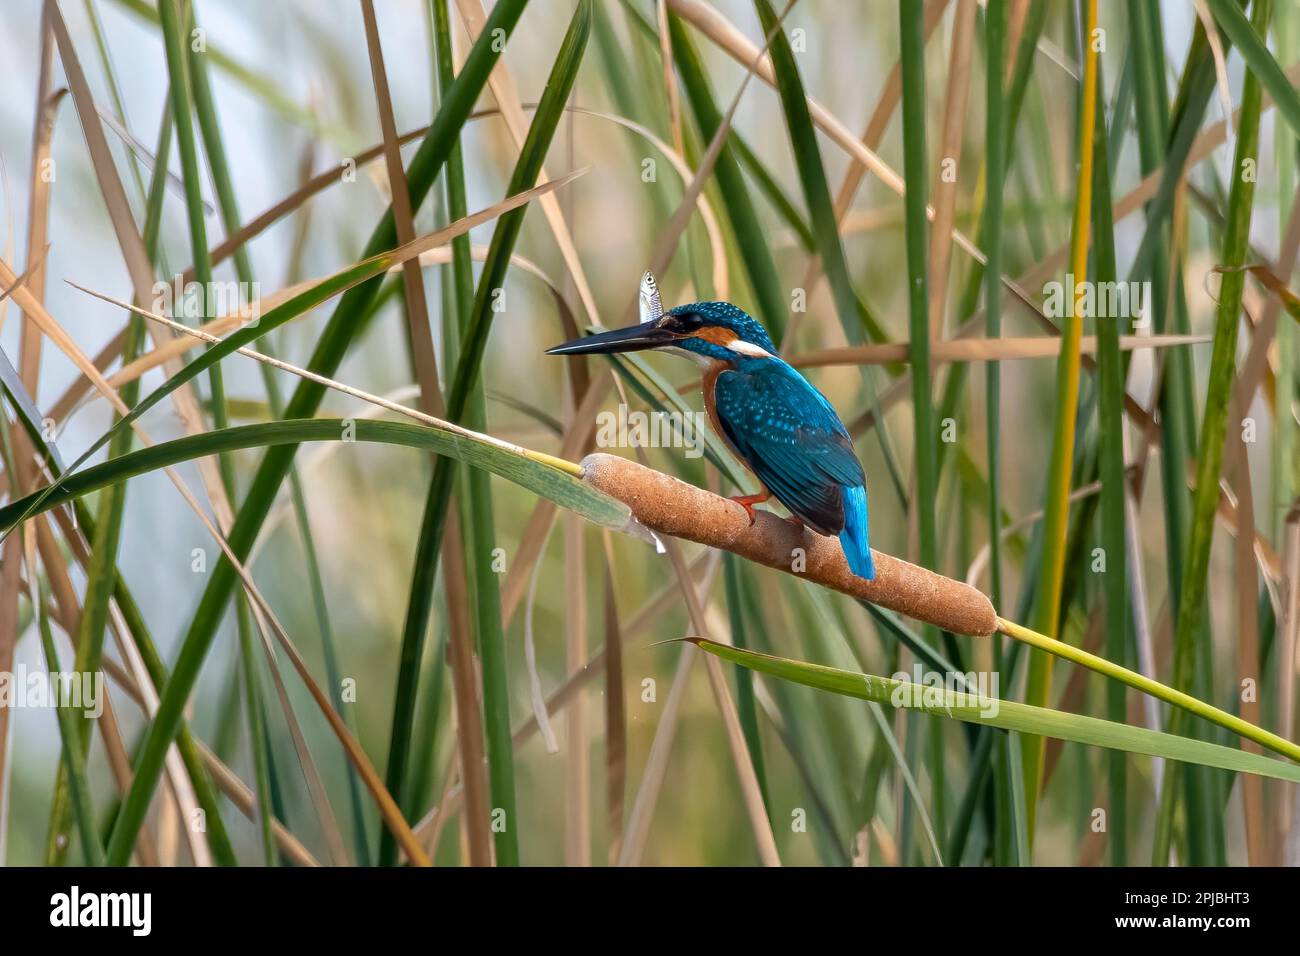 Common kingfisher (Alcedo atthis), also known as the Eurasian kingfisher and river kingfisher, with fish catch near Nalsarovar in Gujarat, India Stock Photo